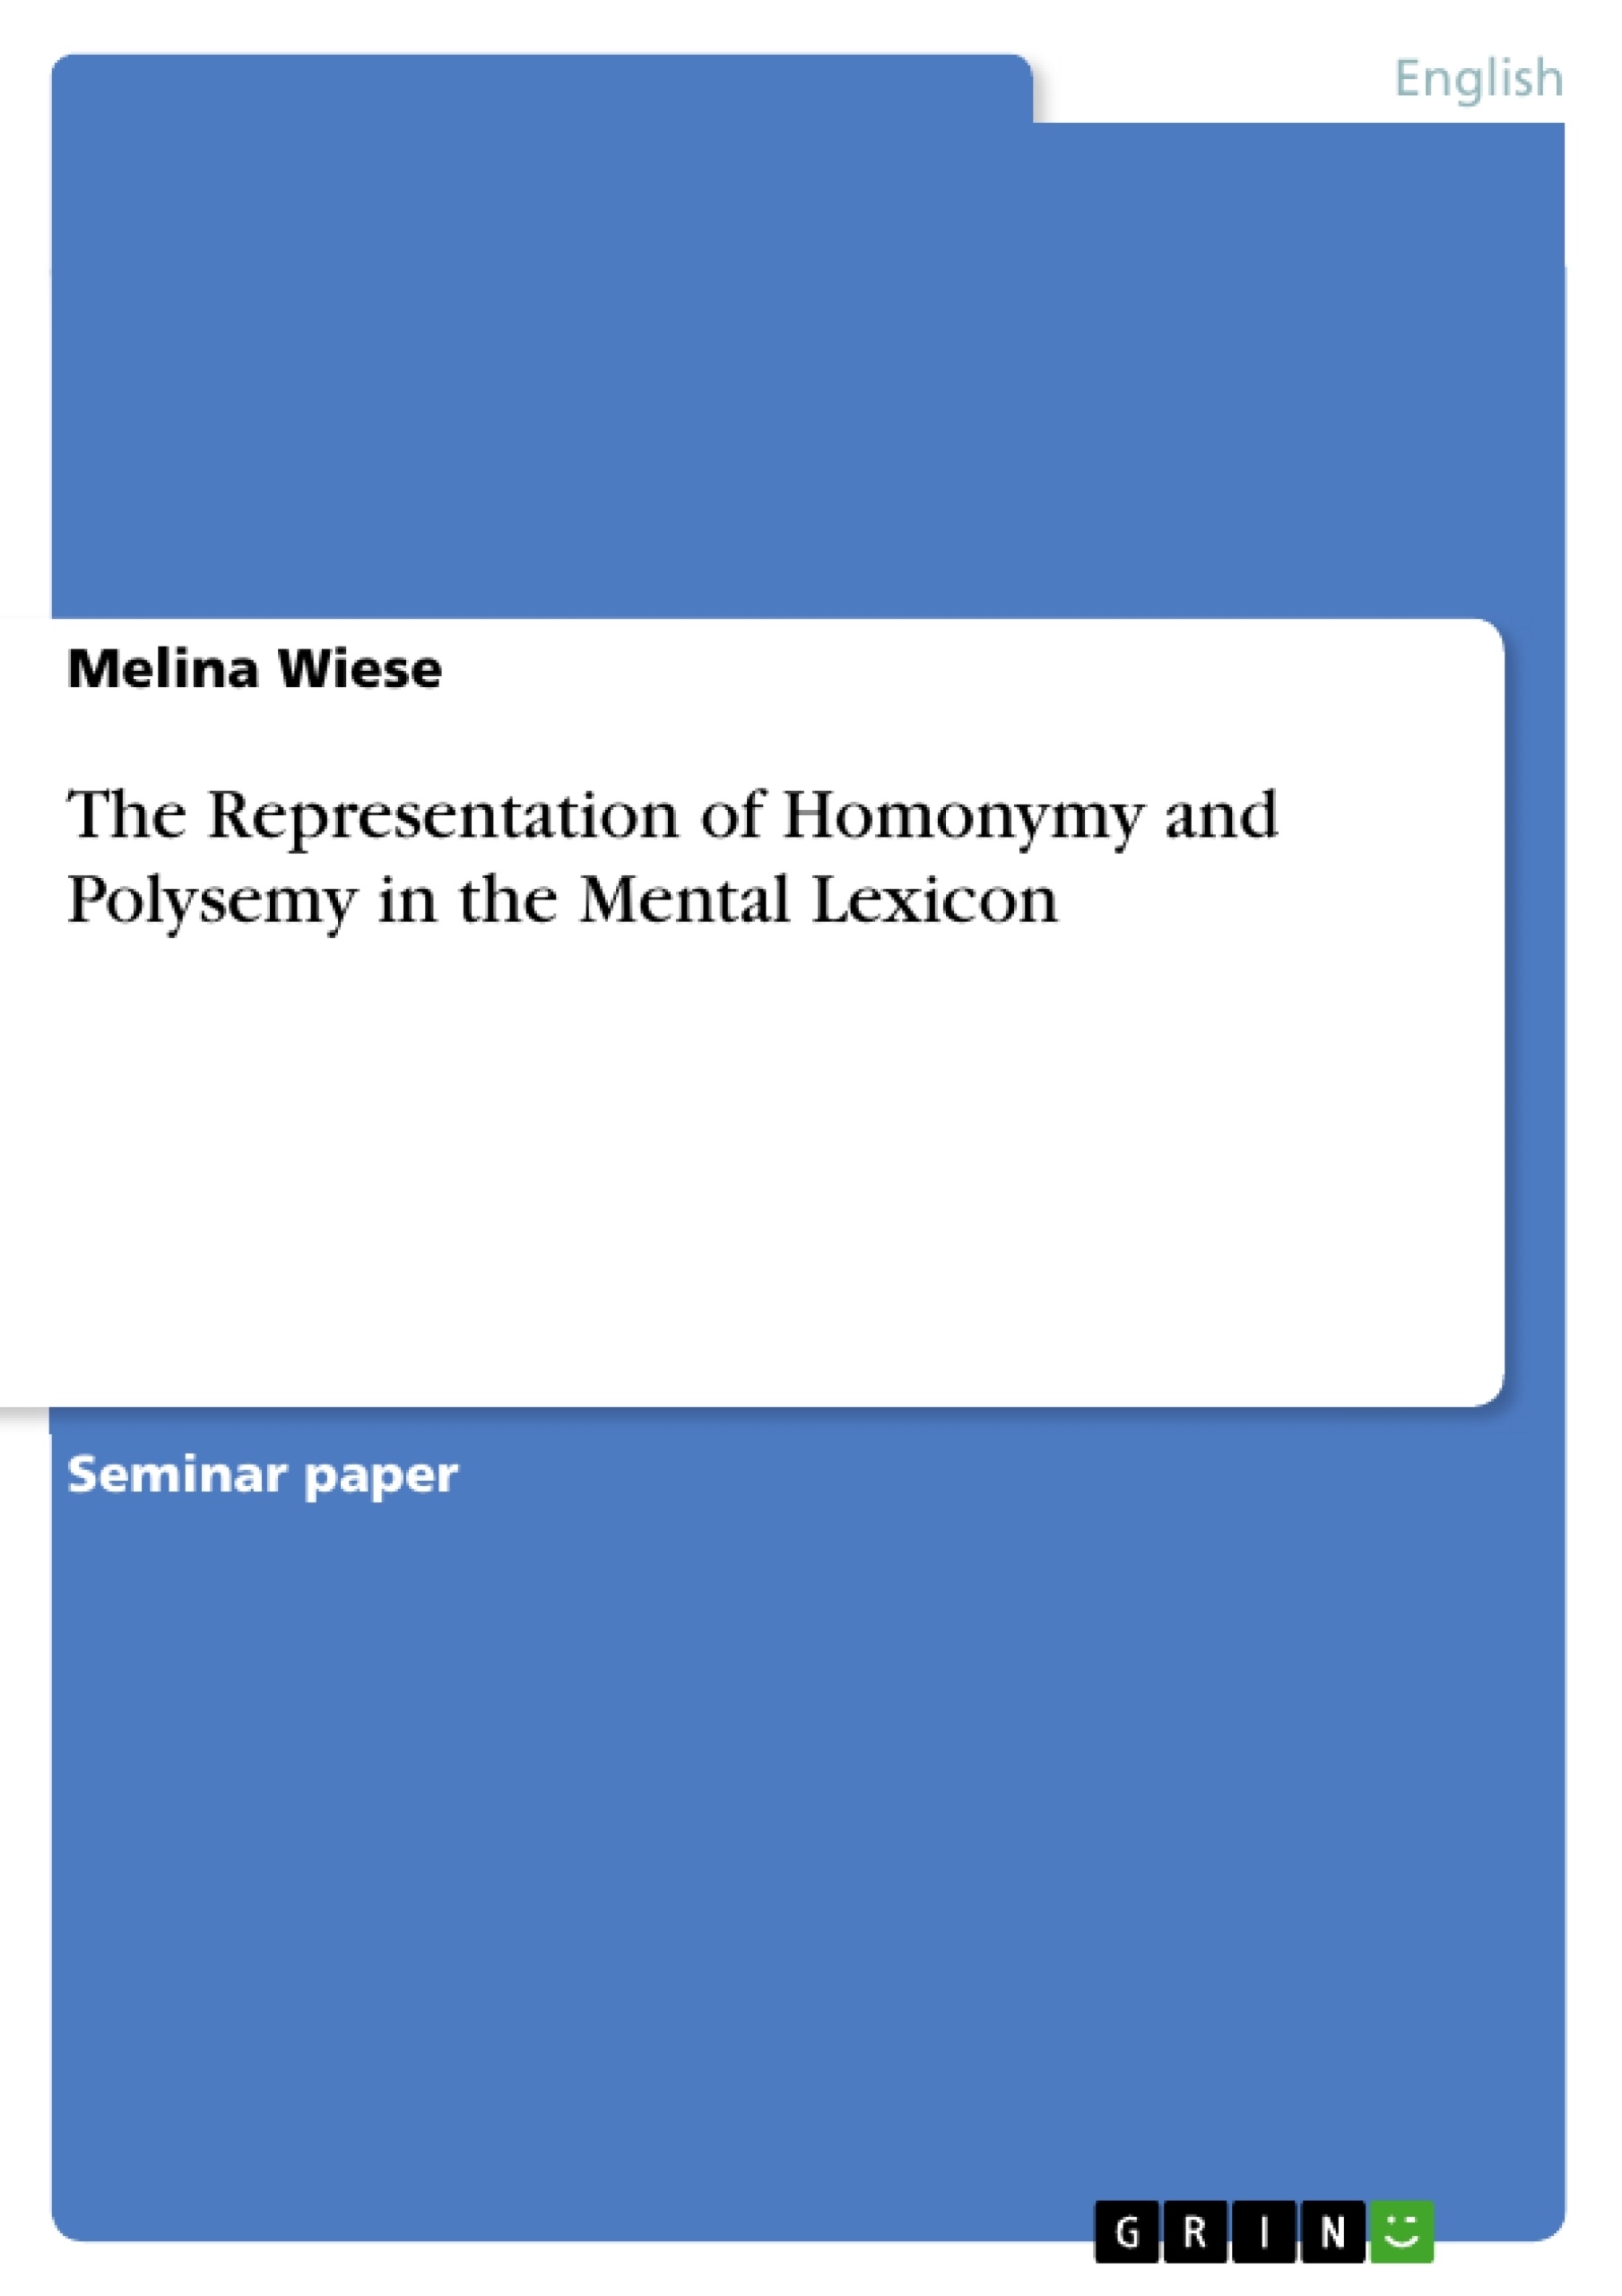 Titre: The Representation of Homonymy and Polysemy in the Mental Lexicon